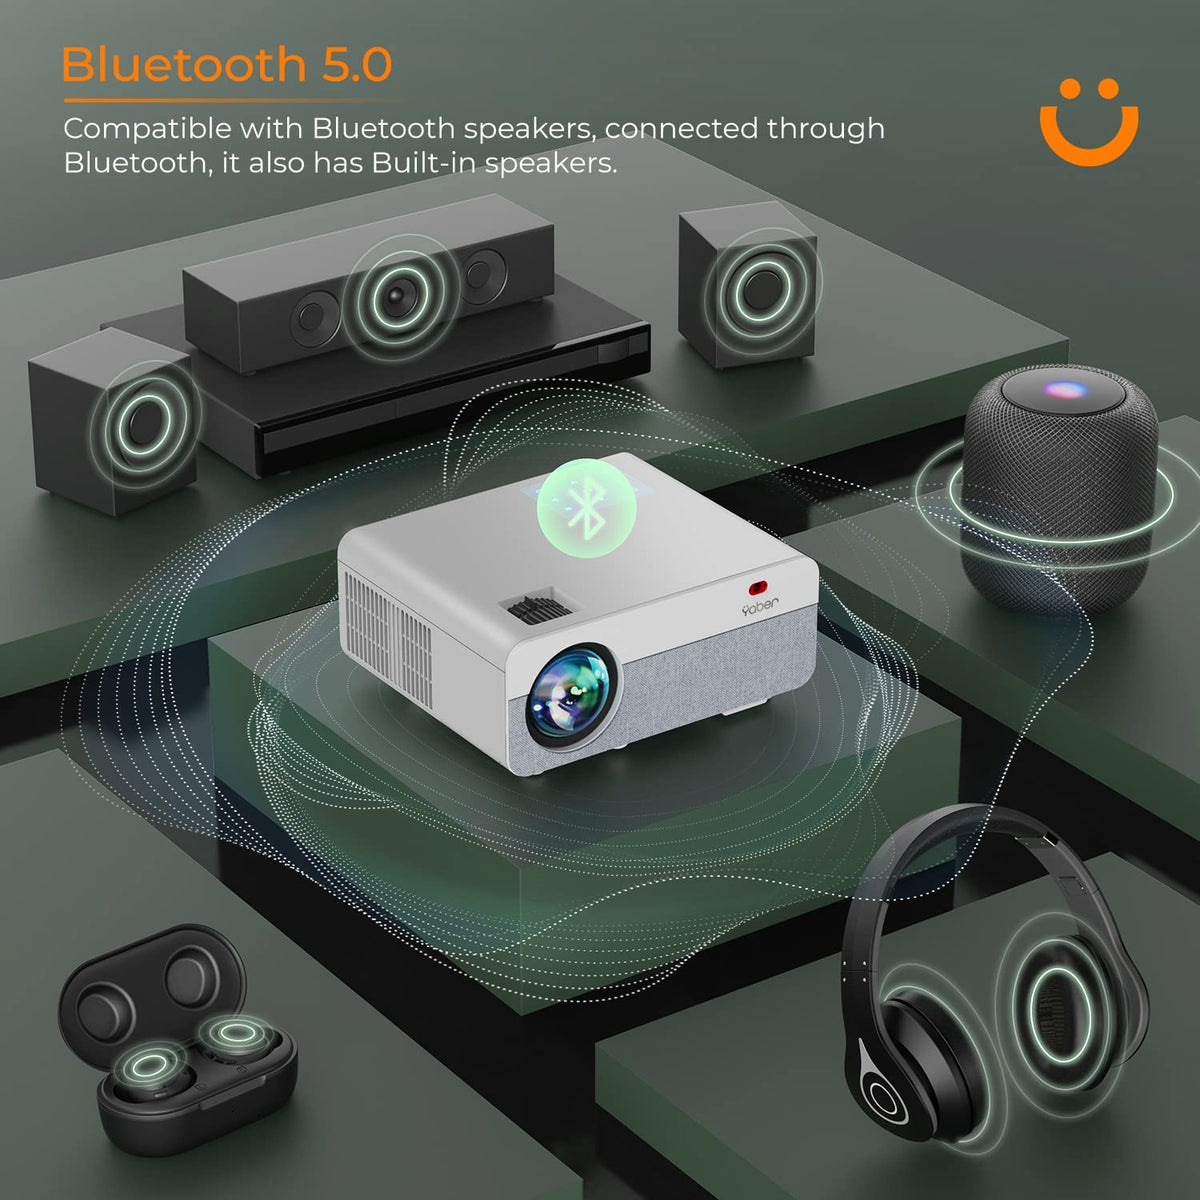 With Bluetooth 5.0 chip,you can connect your ideal Bluetooth speaker, giving you an immersive cinema experience.